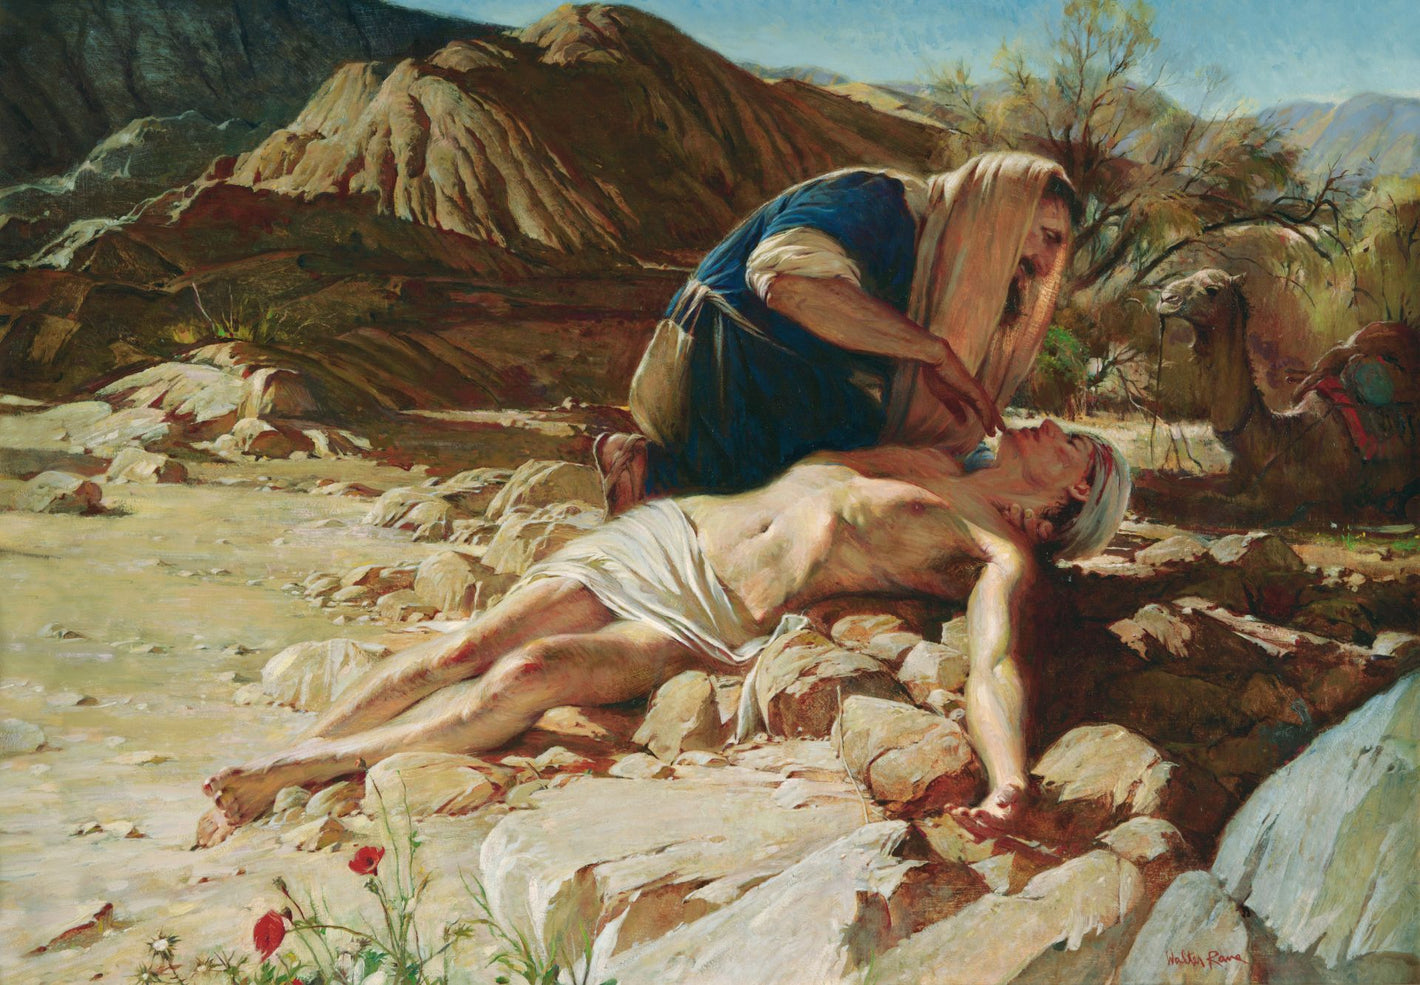 The Good Samaritan caring for a wounded man